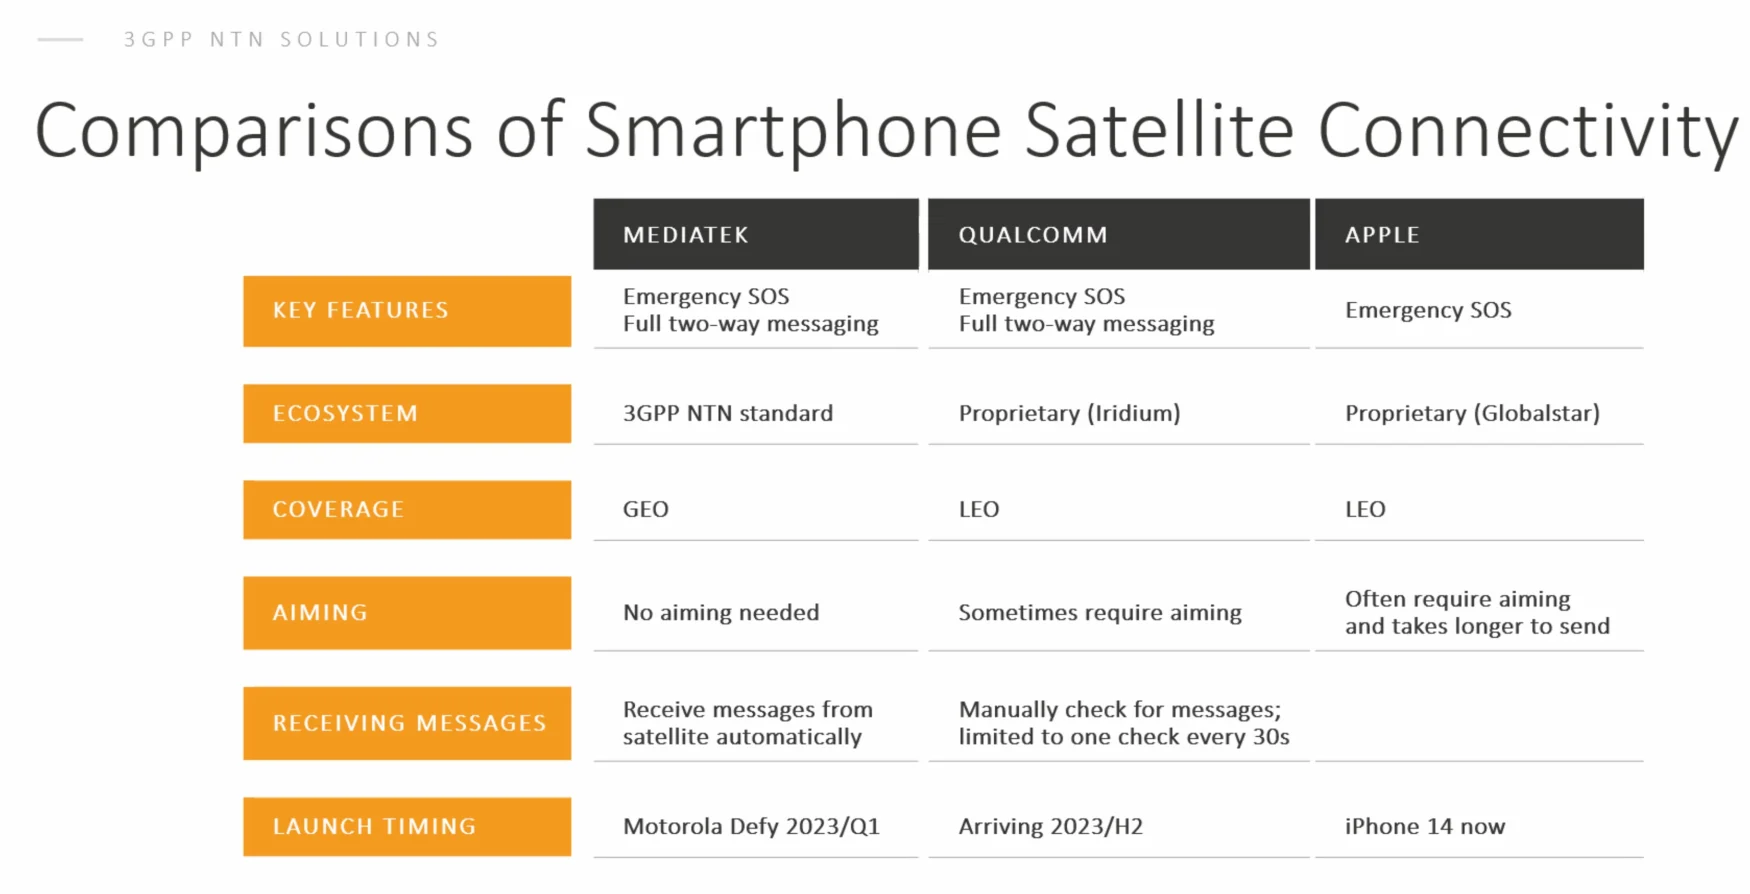 A table showing how MediaTek's satellite technology differs from Qualcomm's and Apple's.